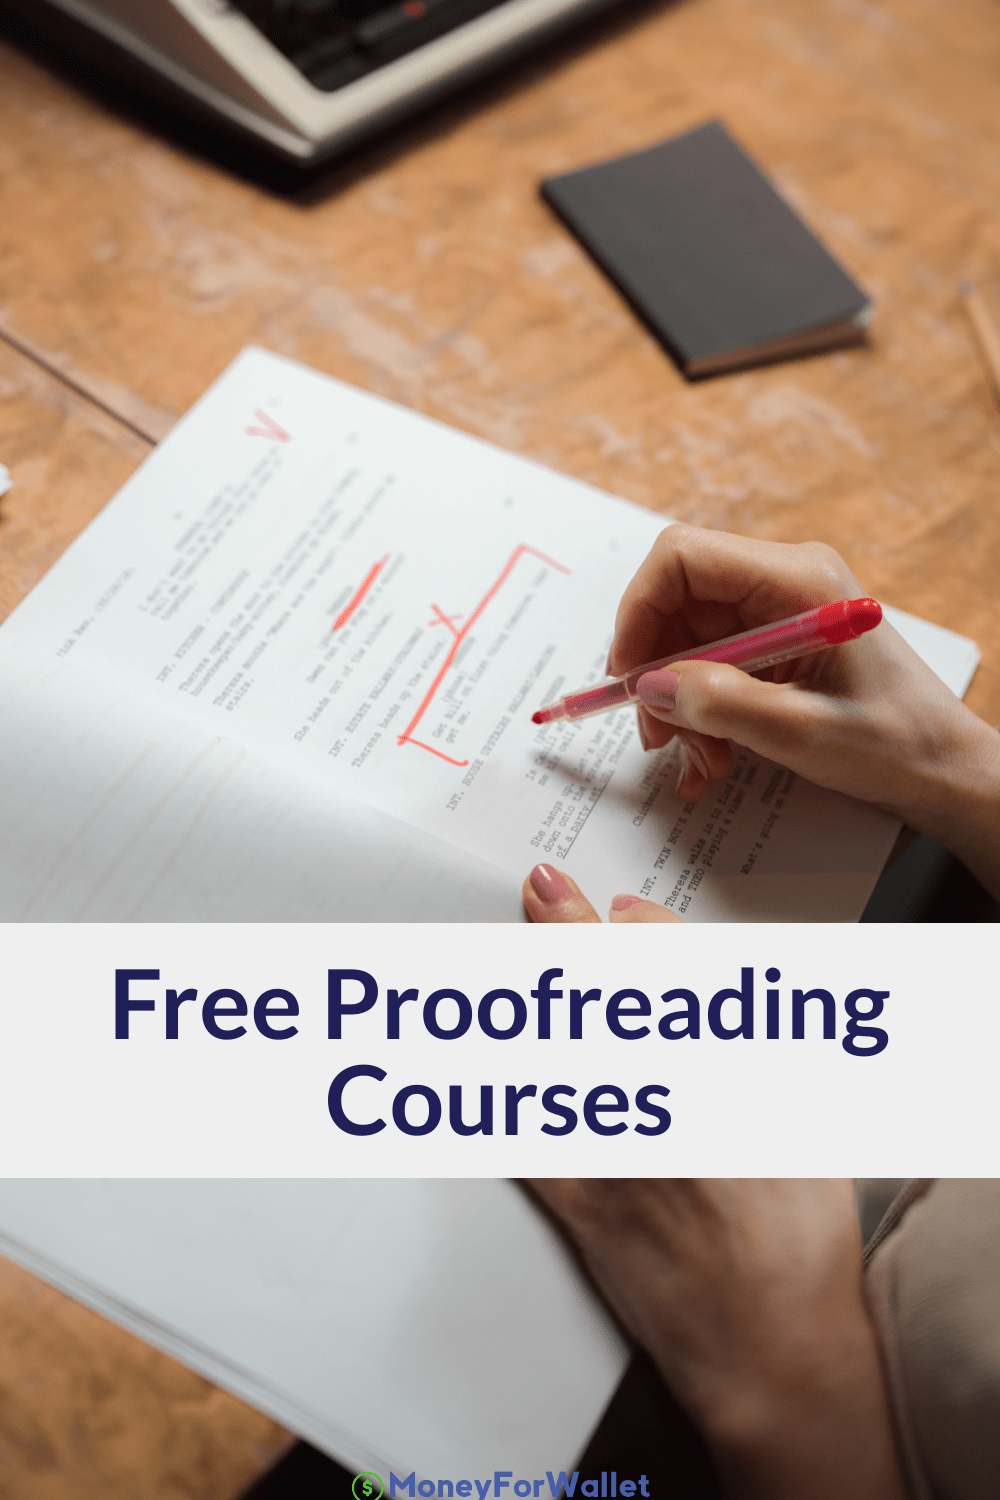 5 BEST FREE PROOFREADING COURSES